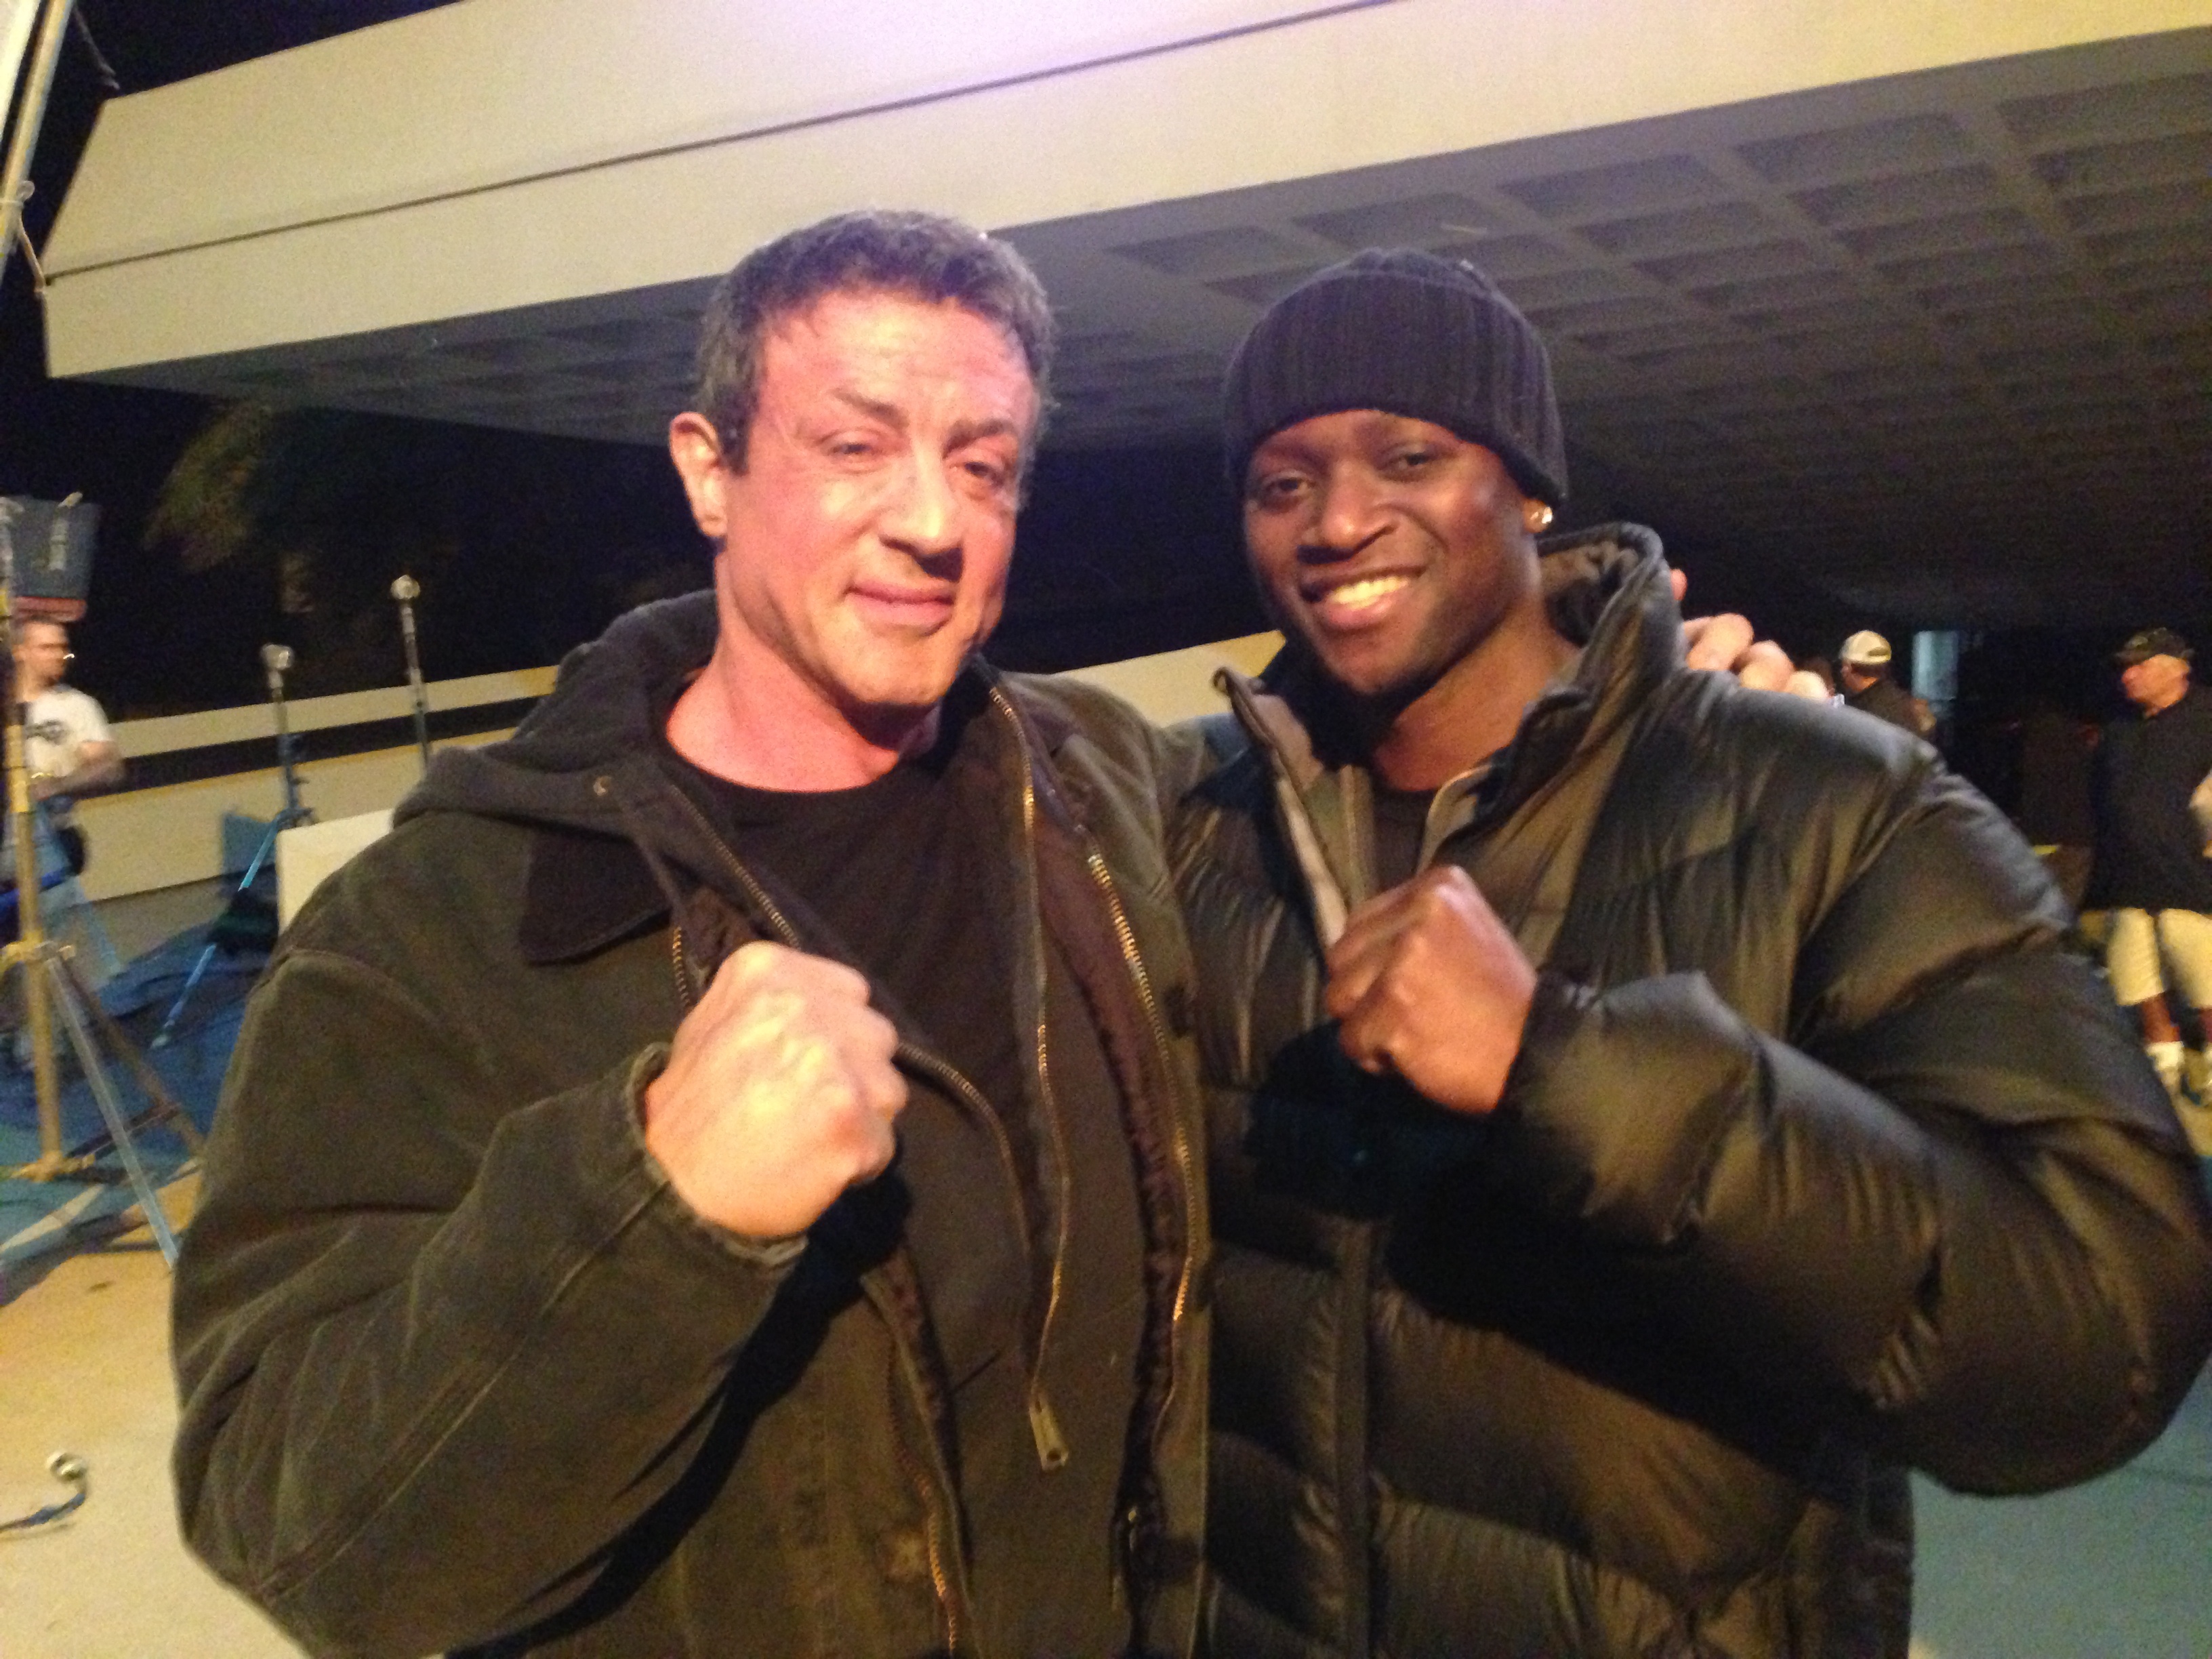 David Kency and Slyvestor Stallone on the set of Grudge Match.